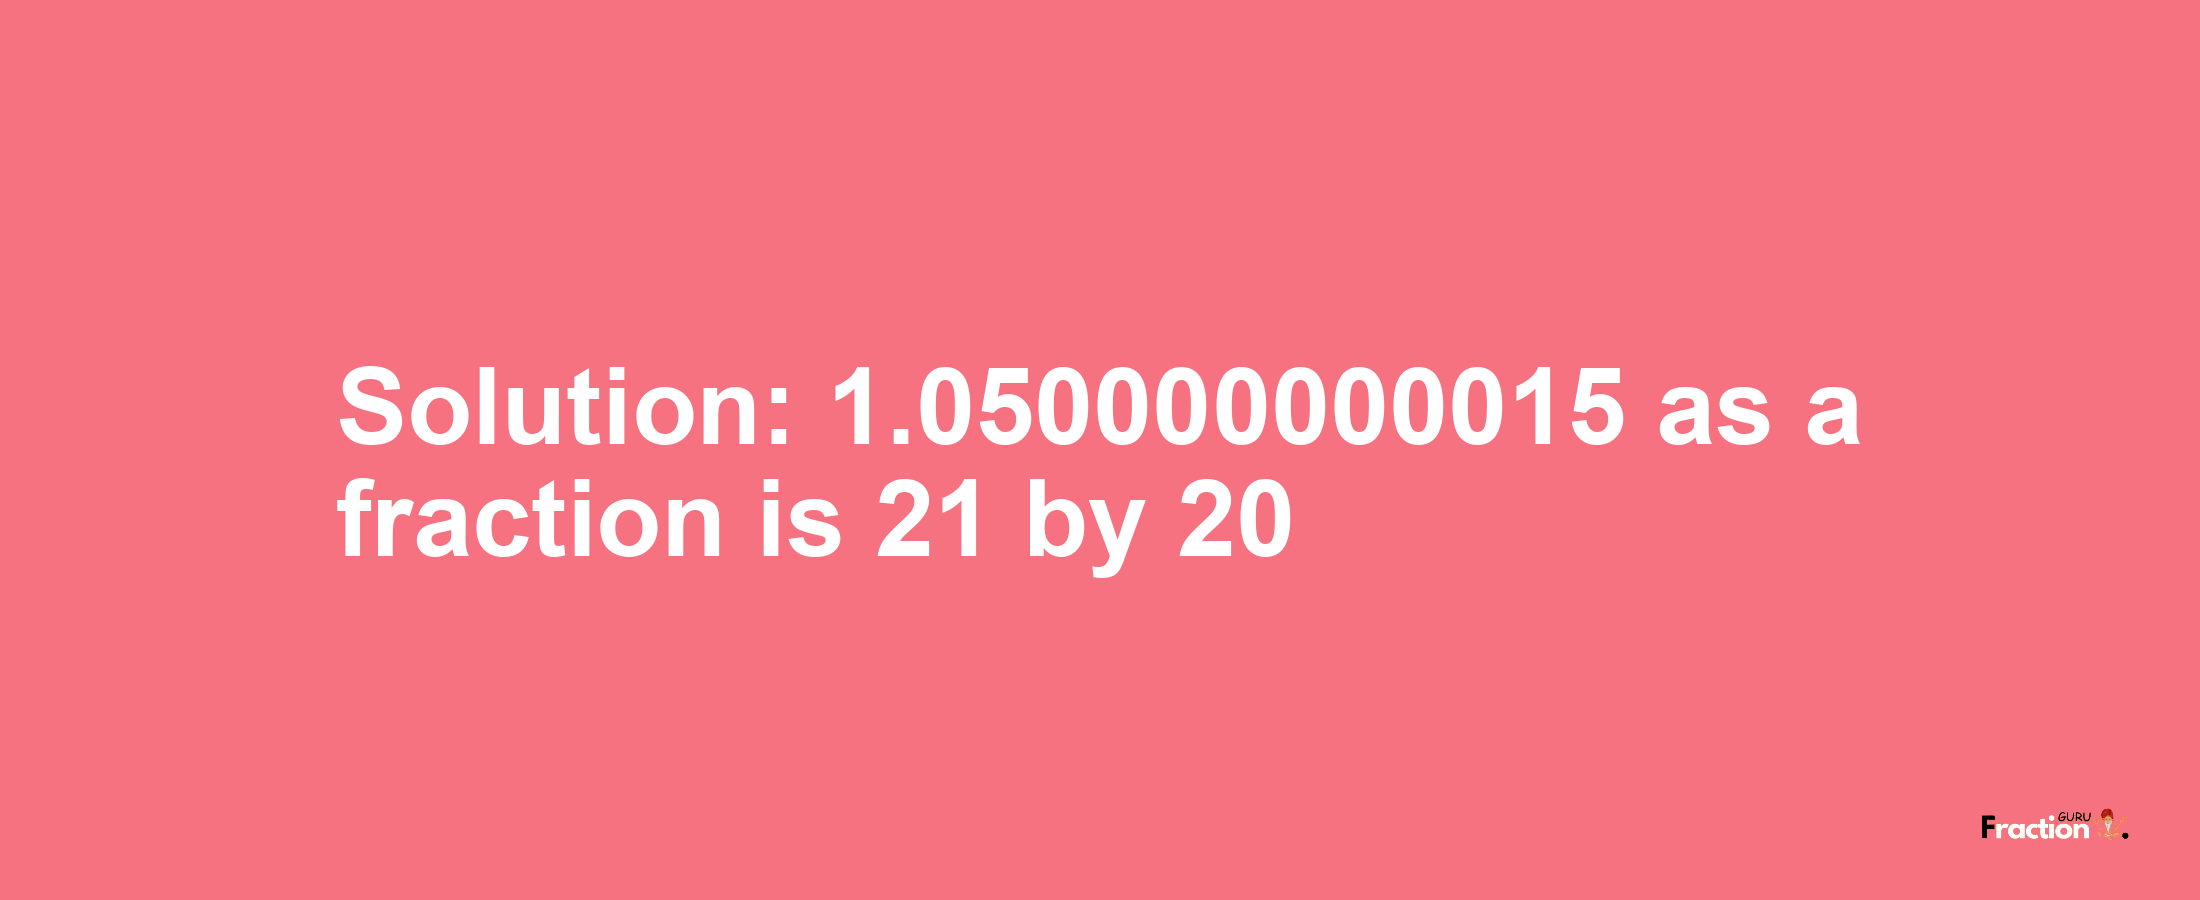 Solution:1.050000000015 as a fraction is 21/20